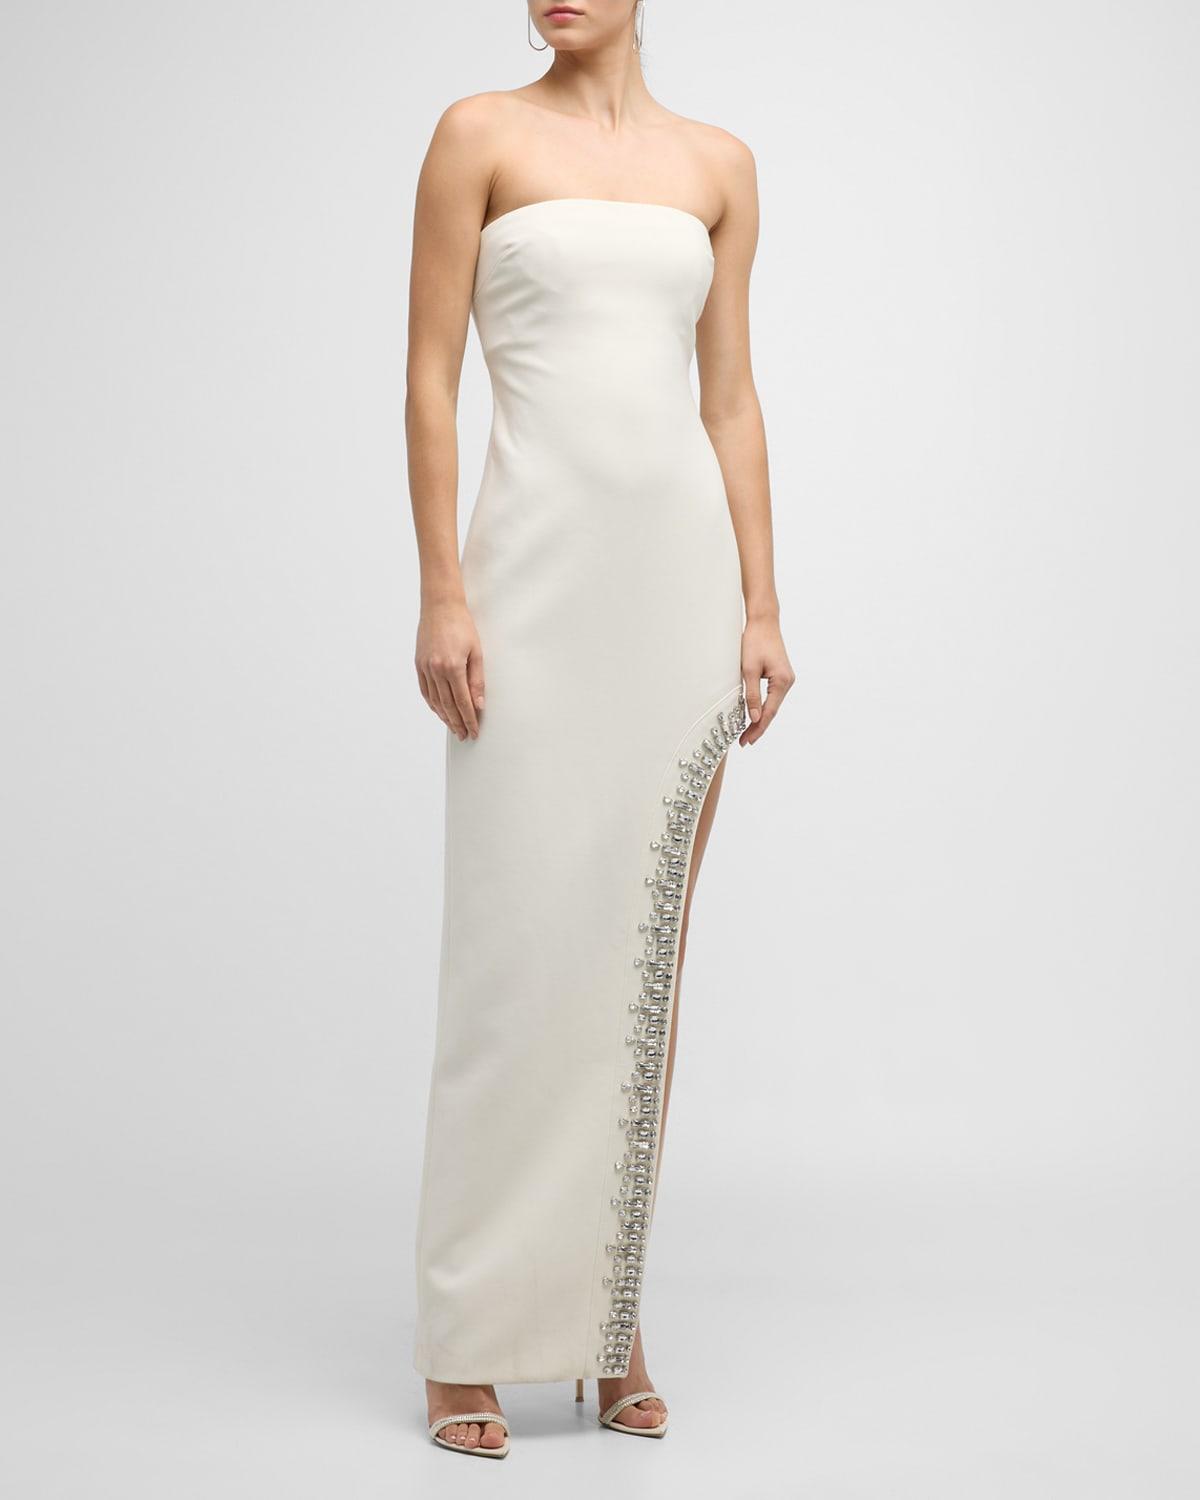 Cinq À Sept Sammy Embellished Strapless Midi Gown in White | Lyst